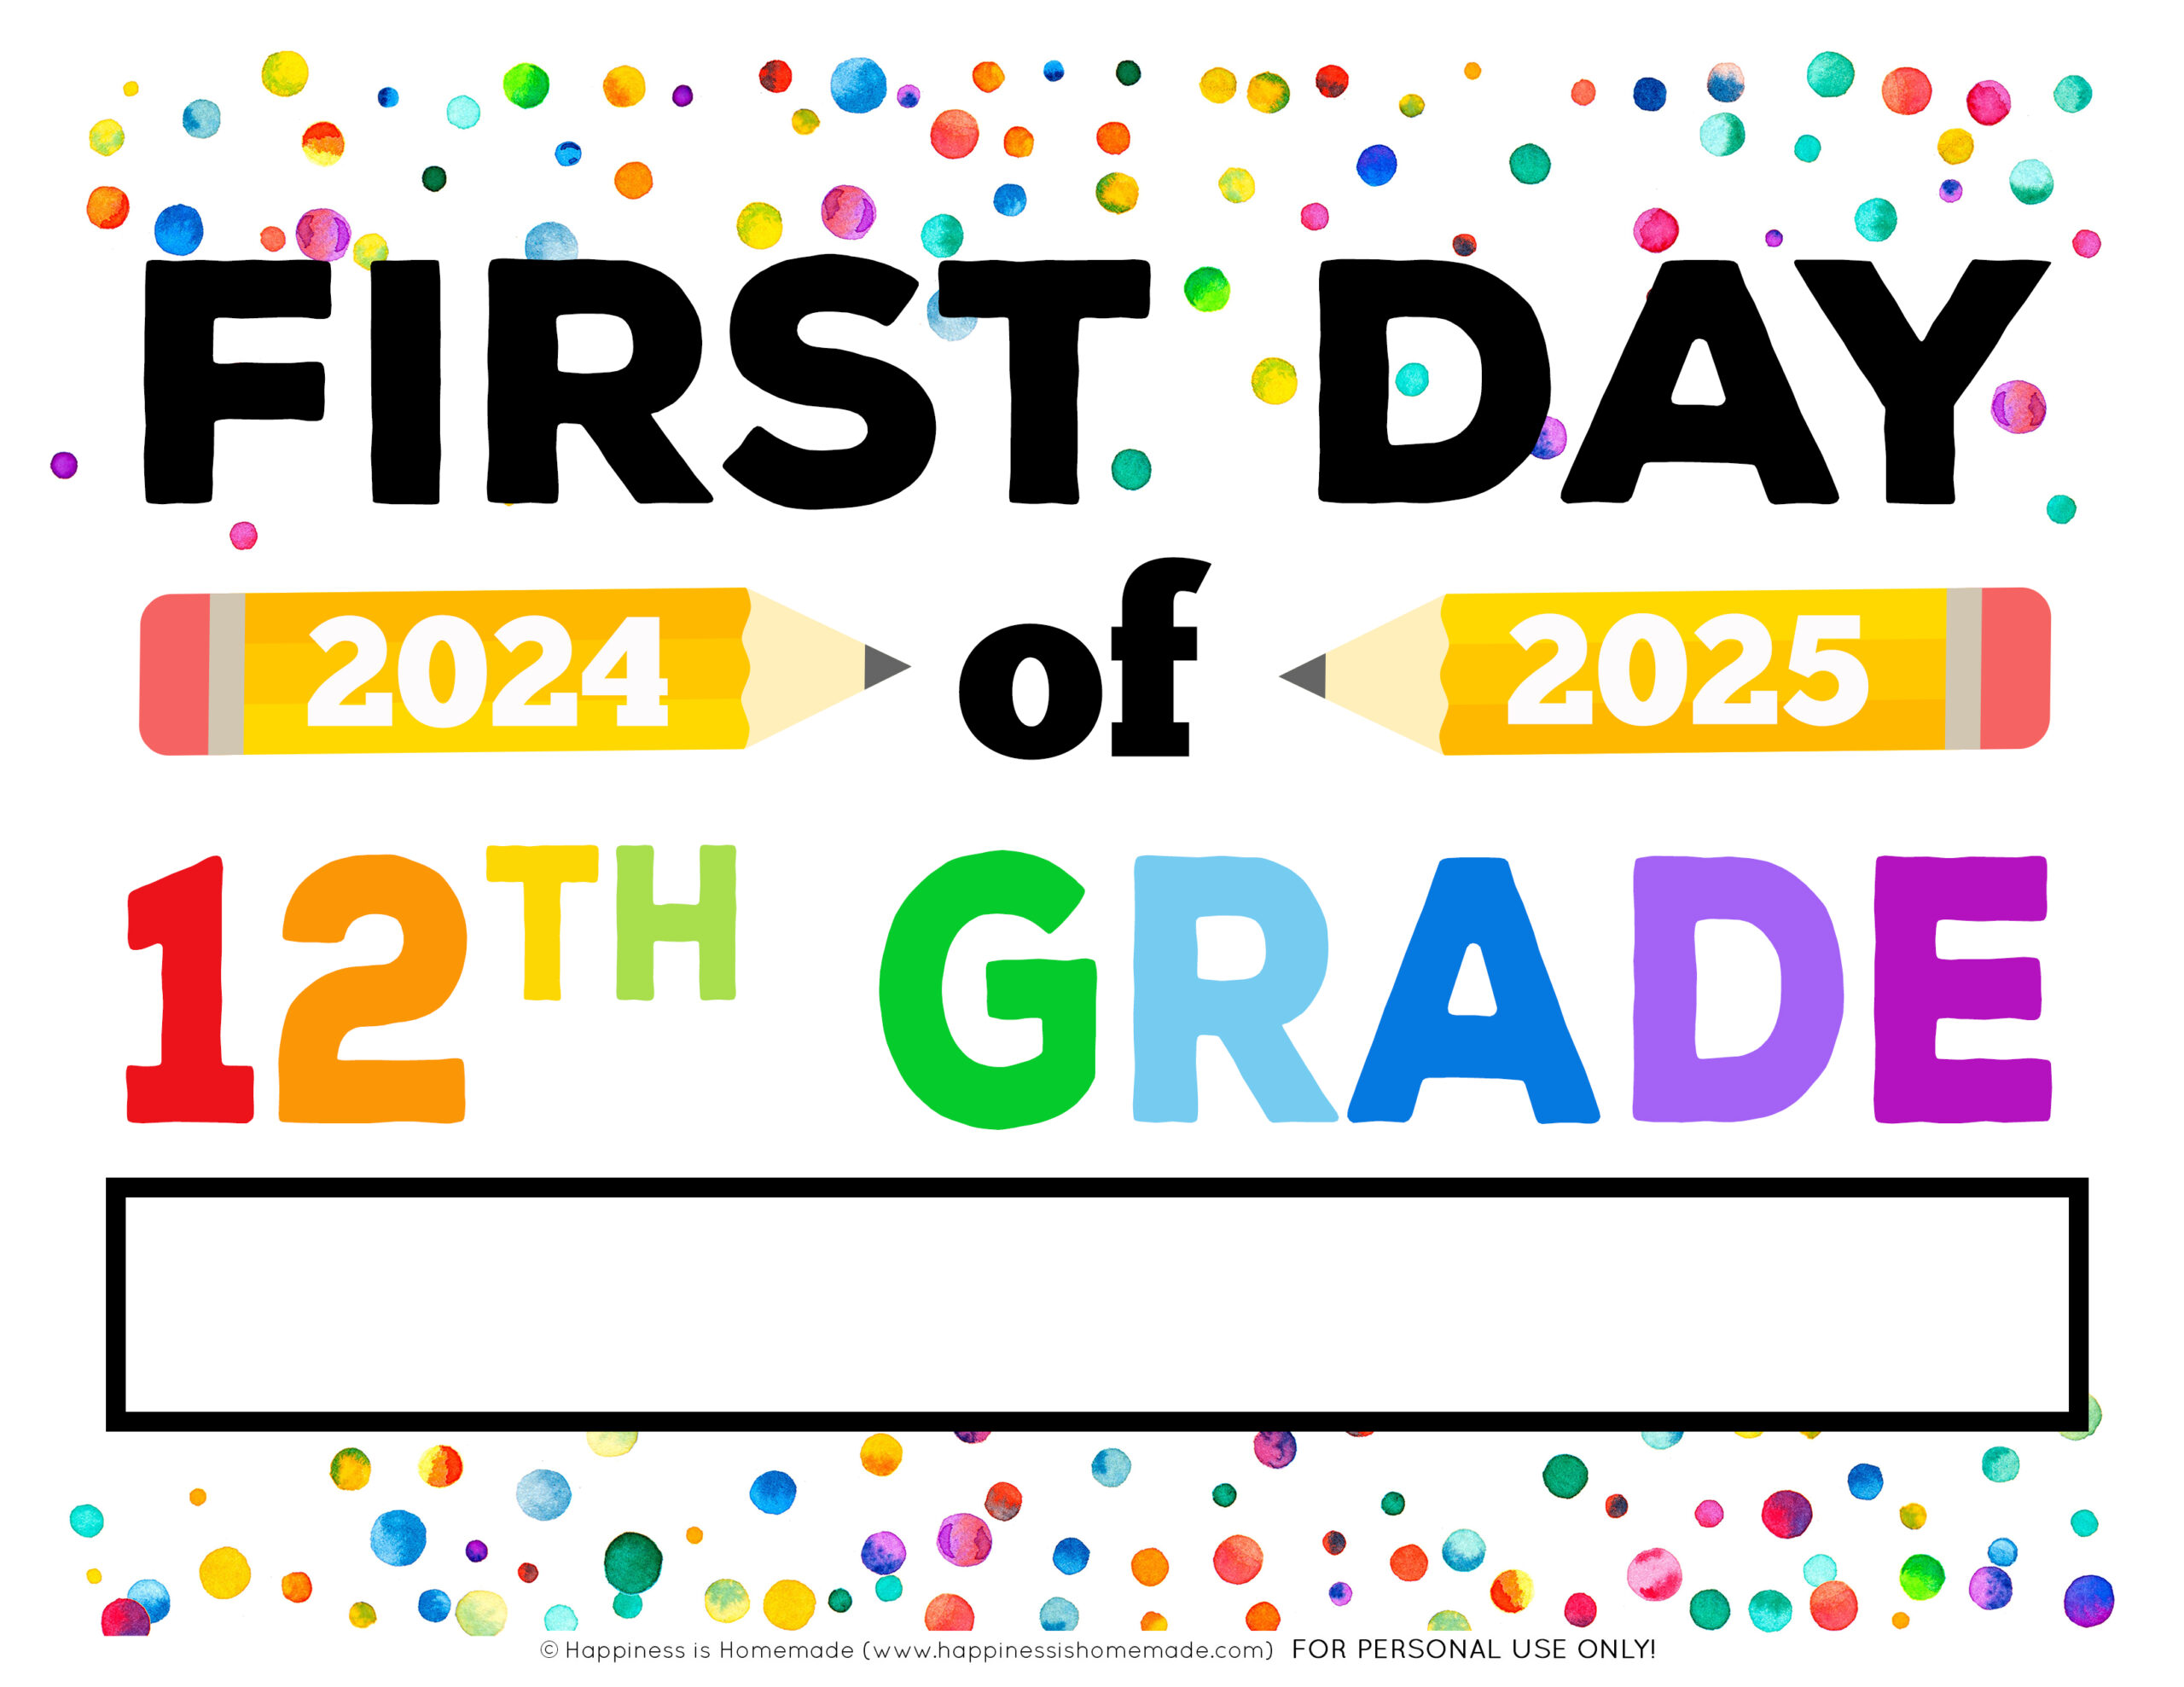 Graphic of customizable Free Printable First Day of school sign 2024 - 2025